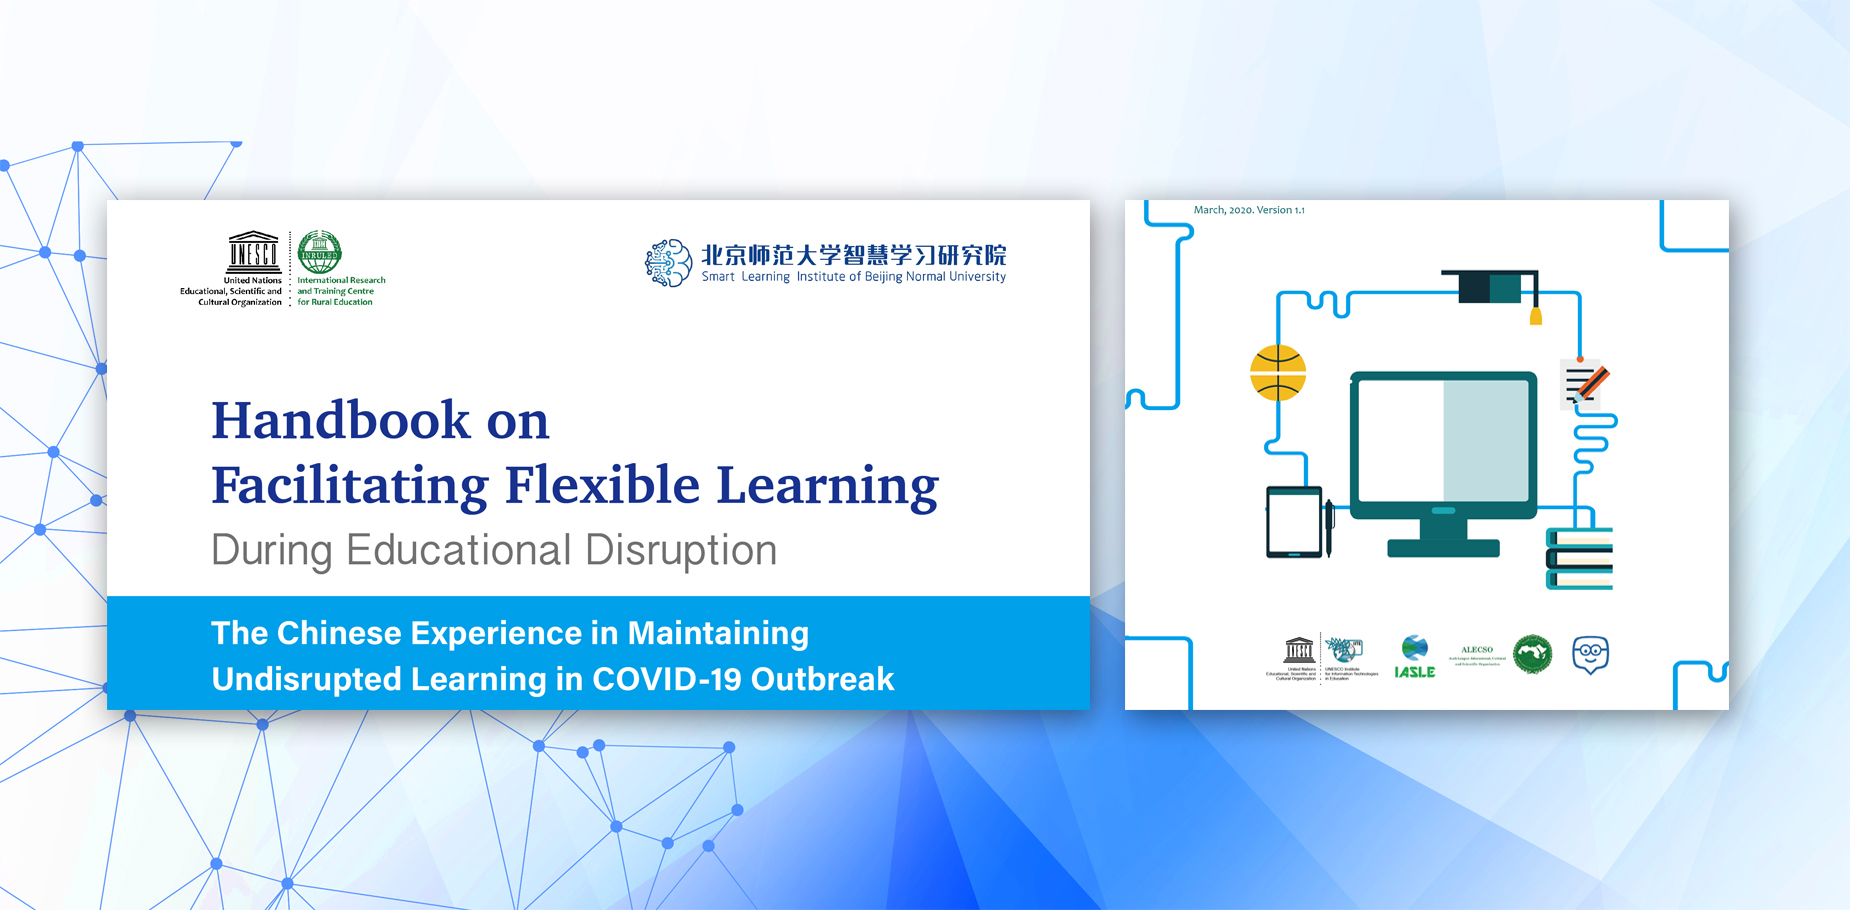 UNESCO released the Handbook on Facilitating Flexible Learning During Educational Disruption: The Chinese Experience in Maintaining Undisrupted Learning in COVID-19 Outbreak